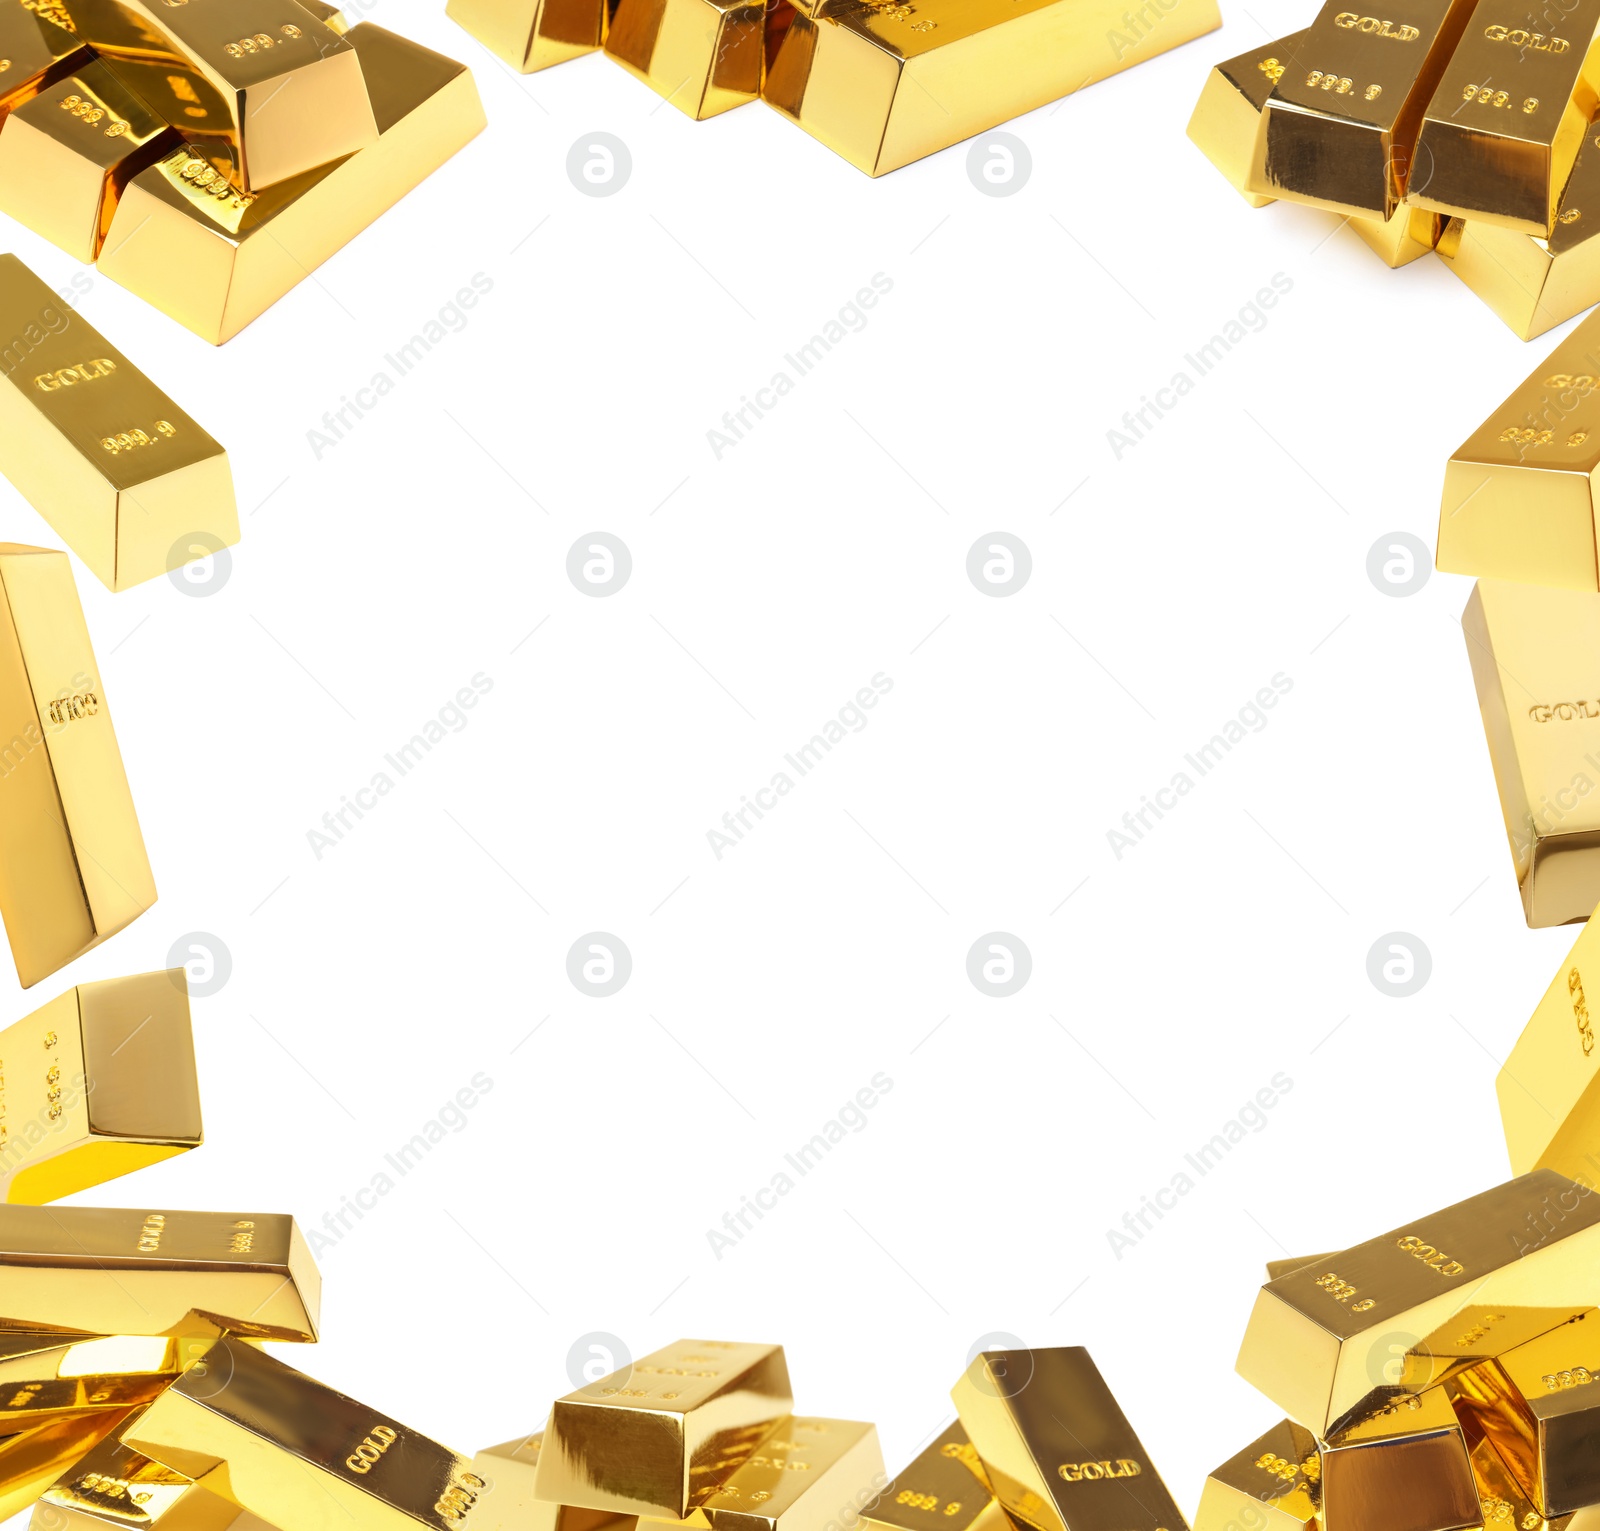 Image of Frame made of shiny gold bars on white background. Space for text